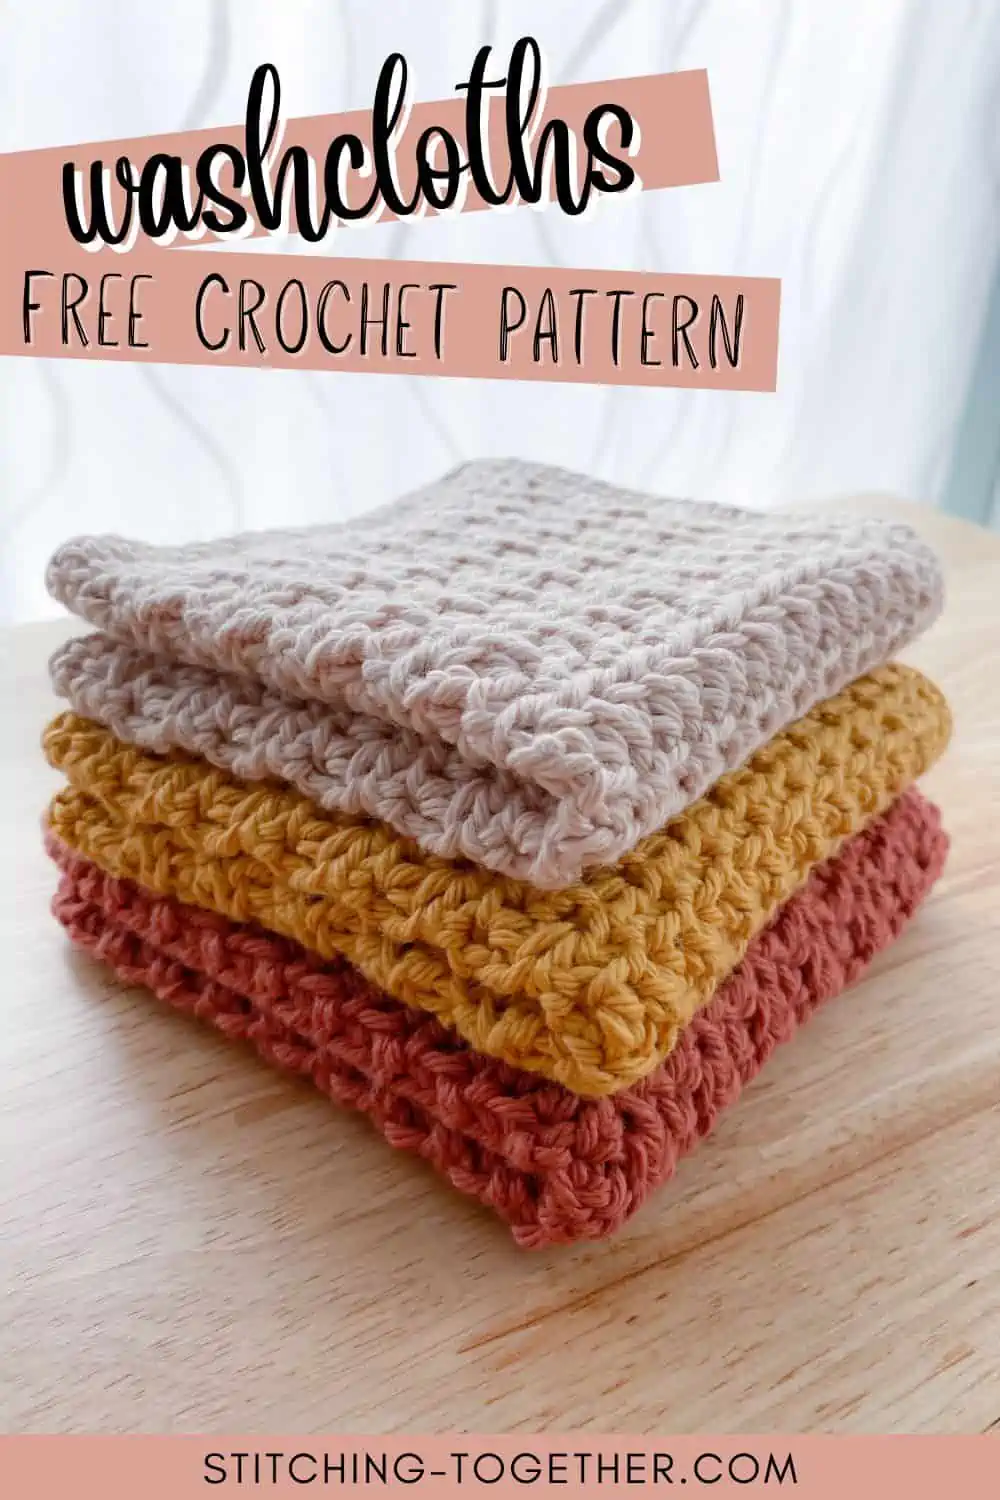 graphic reading "washcloths free crochet pattern" with an image of three washcloths folded and stacked